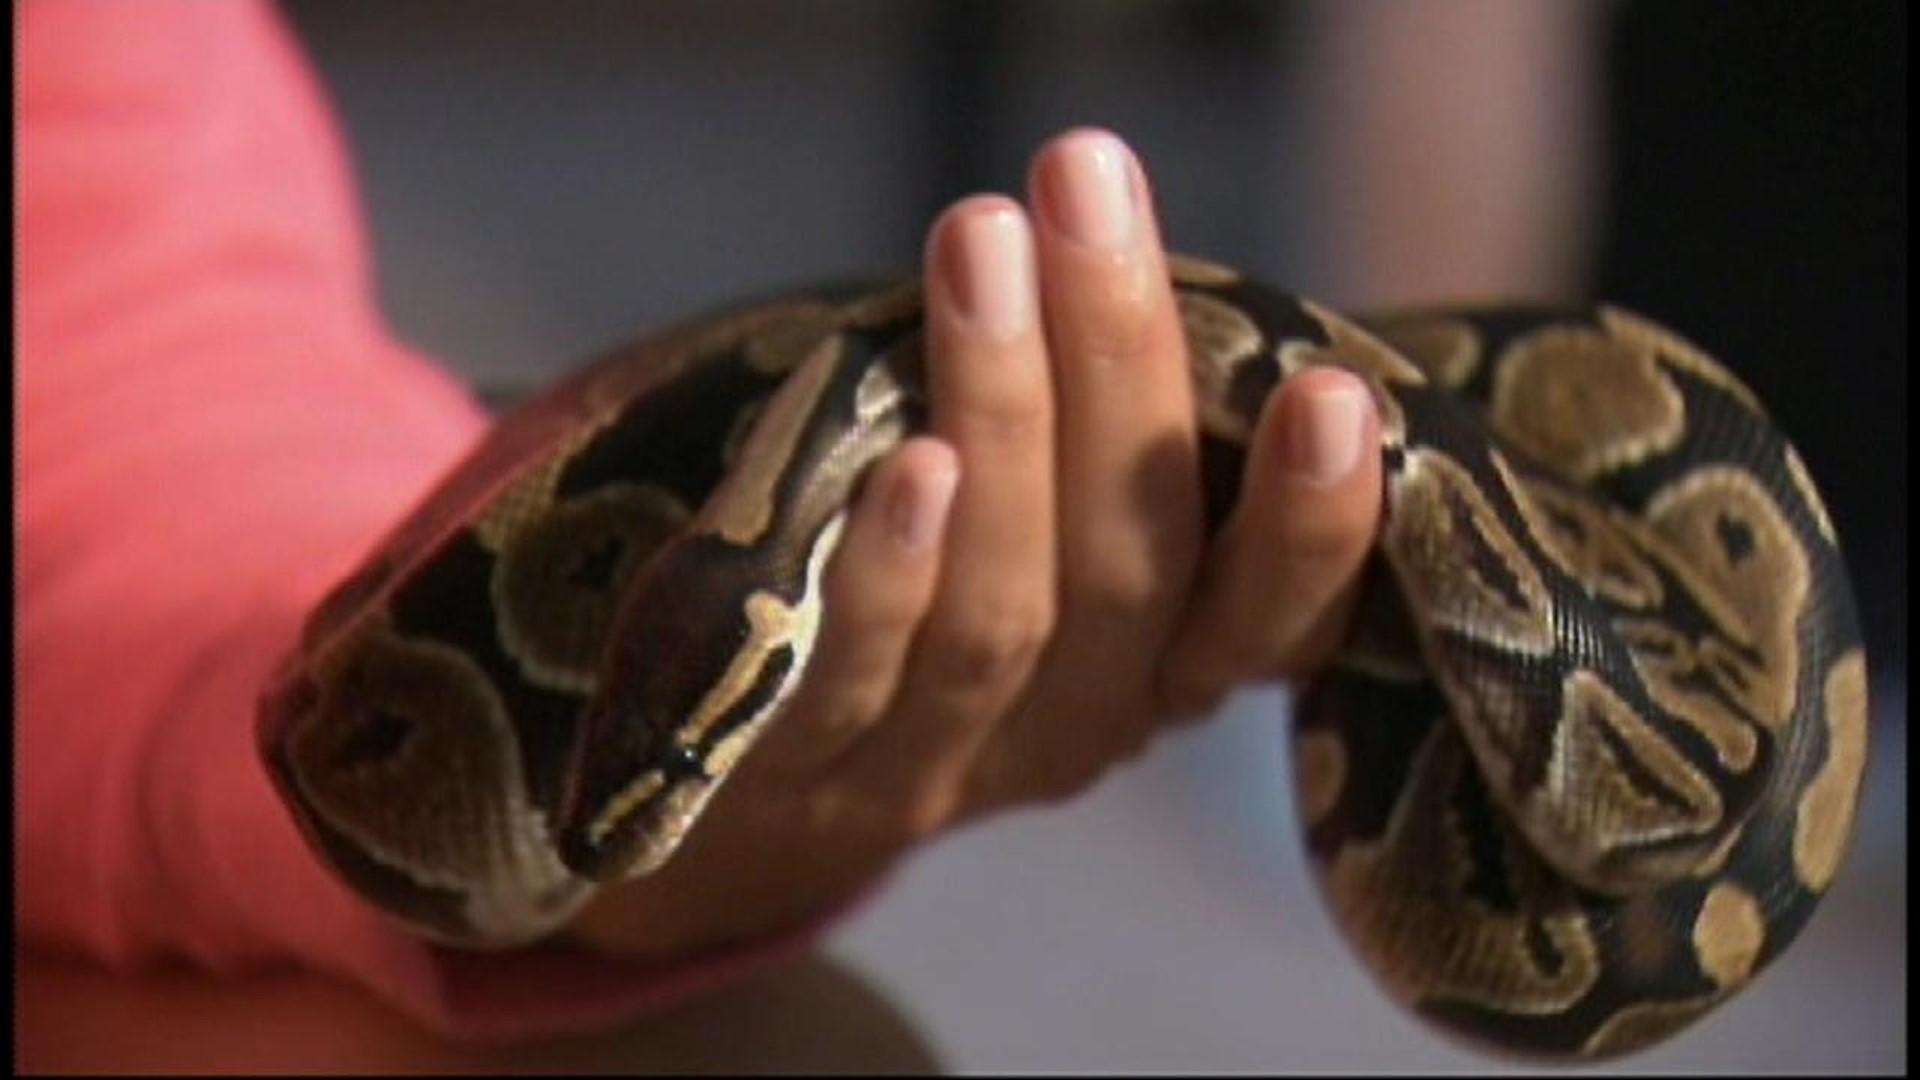 Westerville Fast Food Restaurant Bans Woman With Python